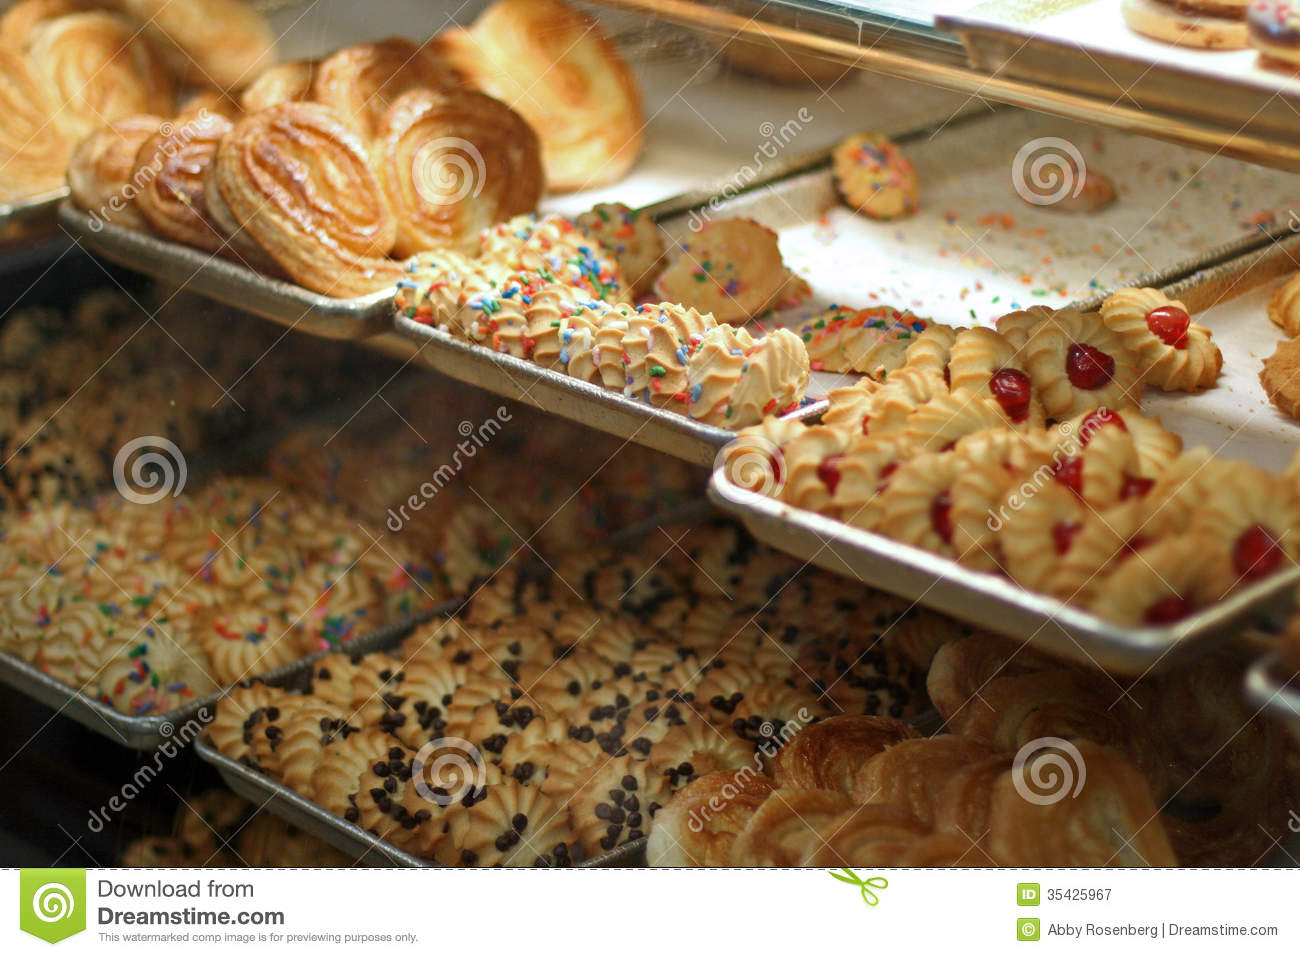 Bakery Cookies Royalty Free Stock Photography   Image  35425967